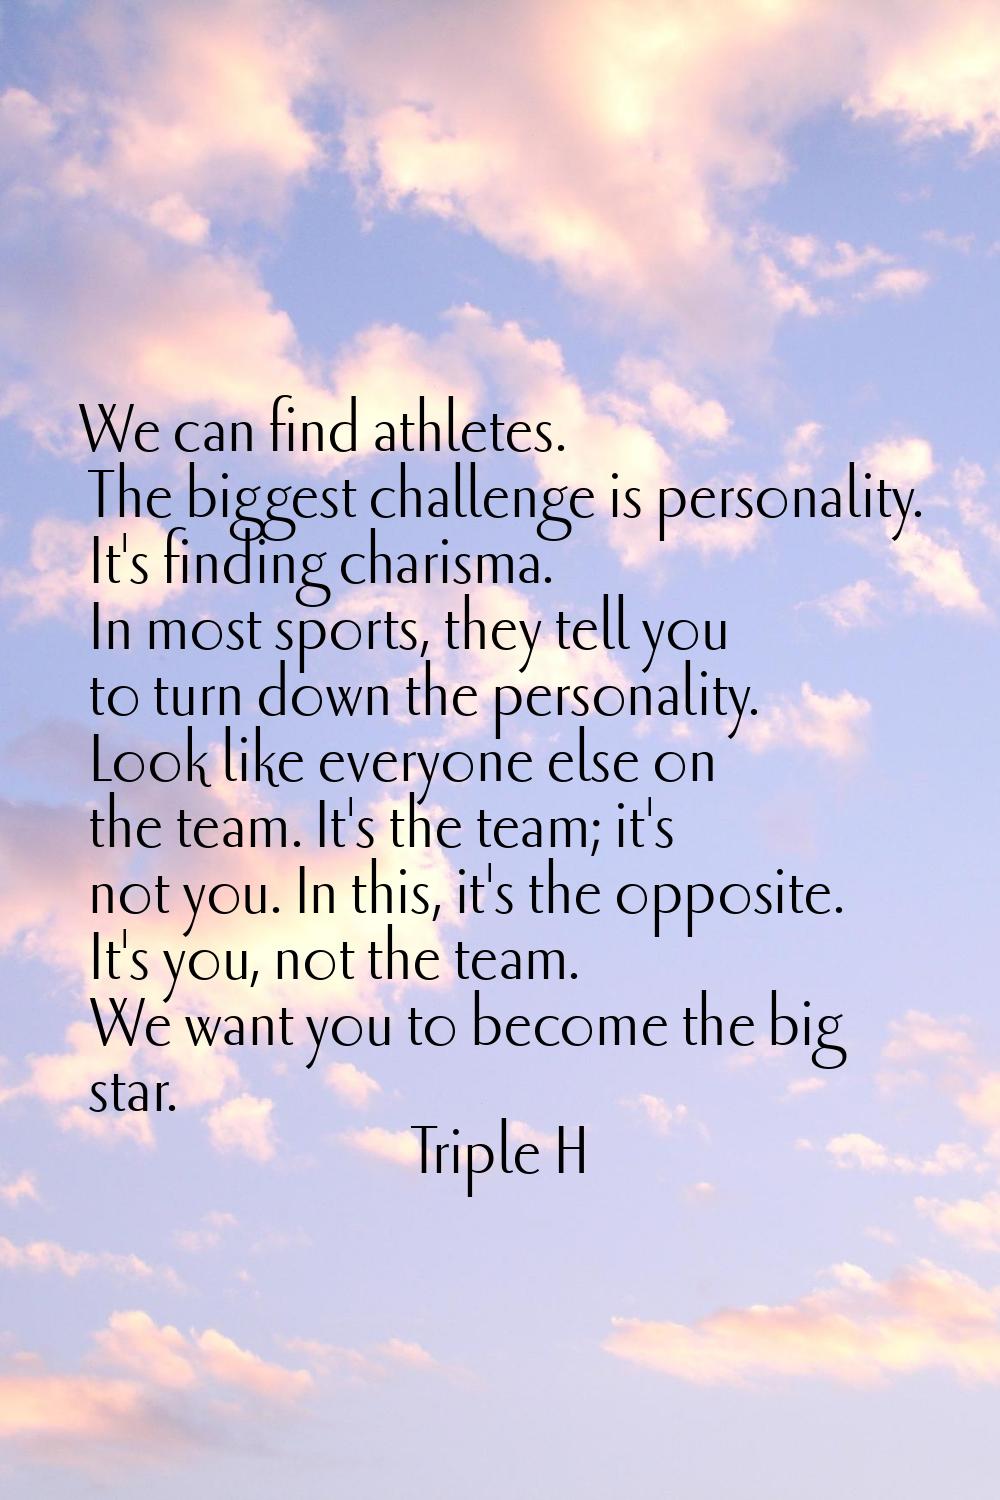 We can find athletes. The biggest challenge is personality. It's finding charisma. In most sports, 